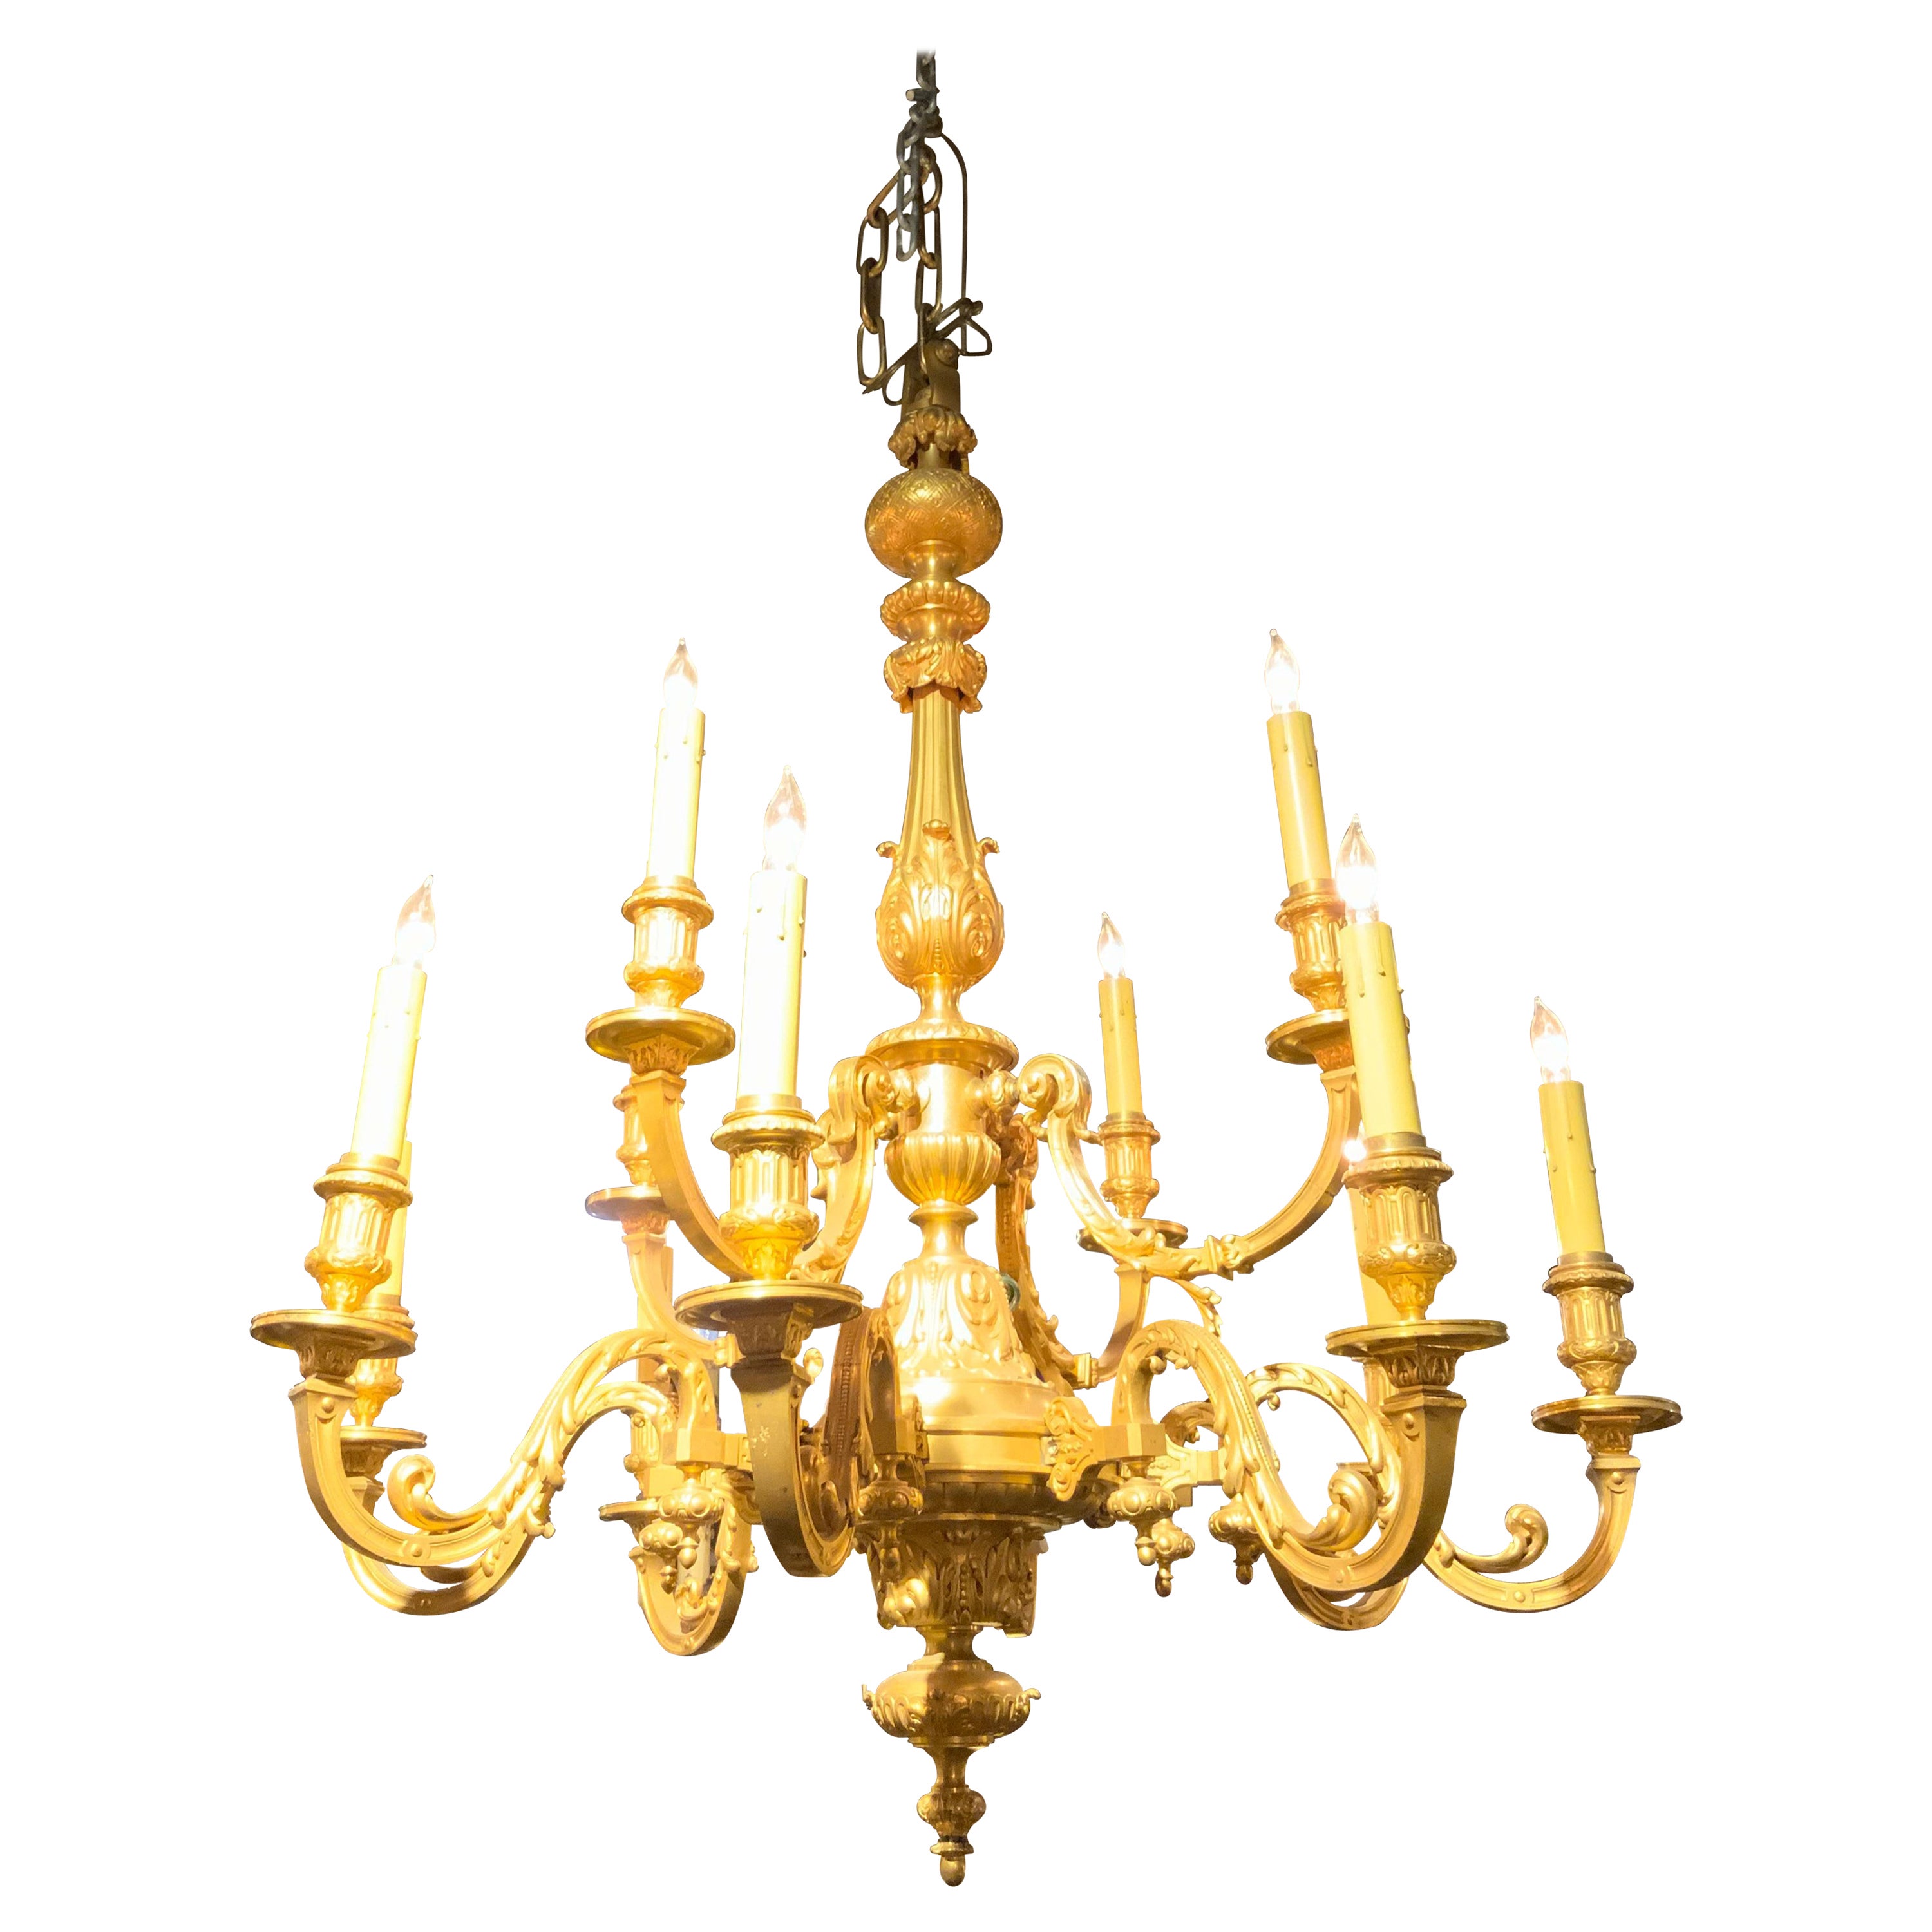 Bronze dore classic French style chandelier with 12 lights For Sale